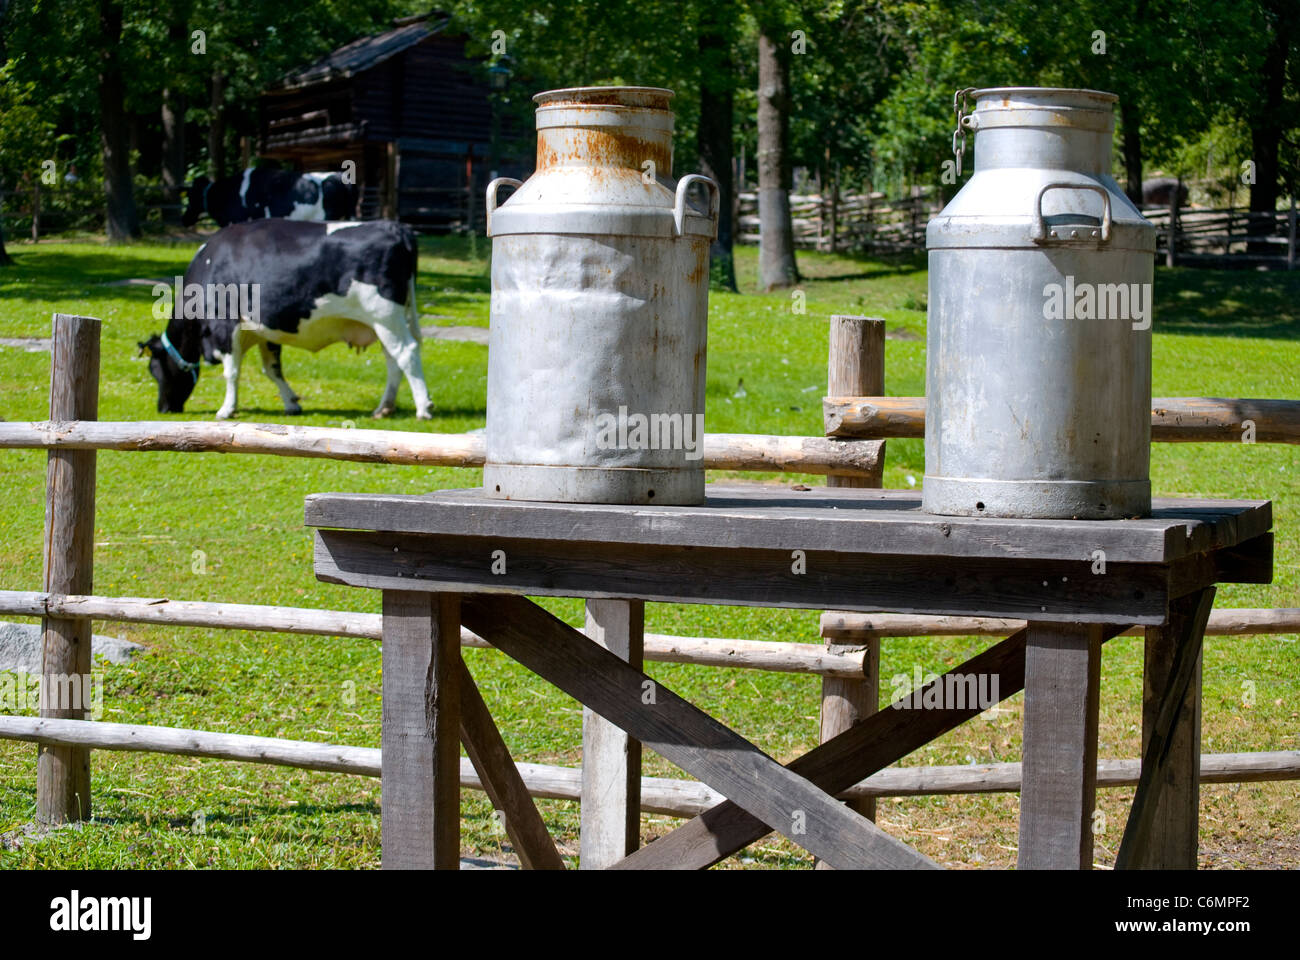 Milk cans on a bench, a cow feeding grass in the background Stock Photo